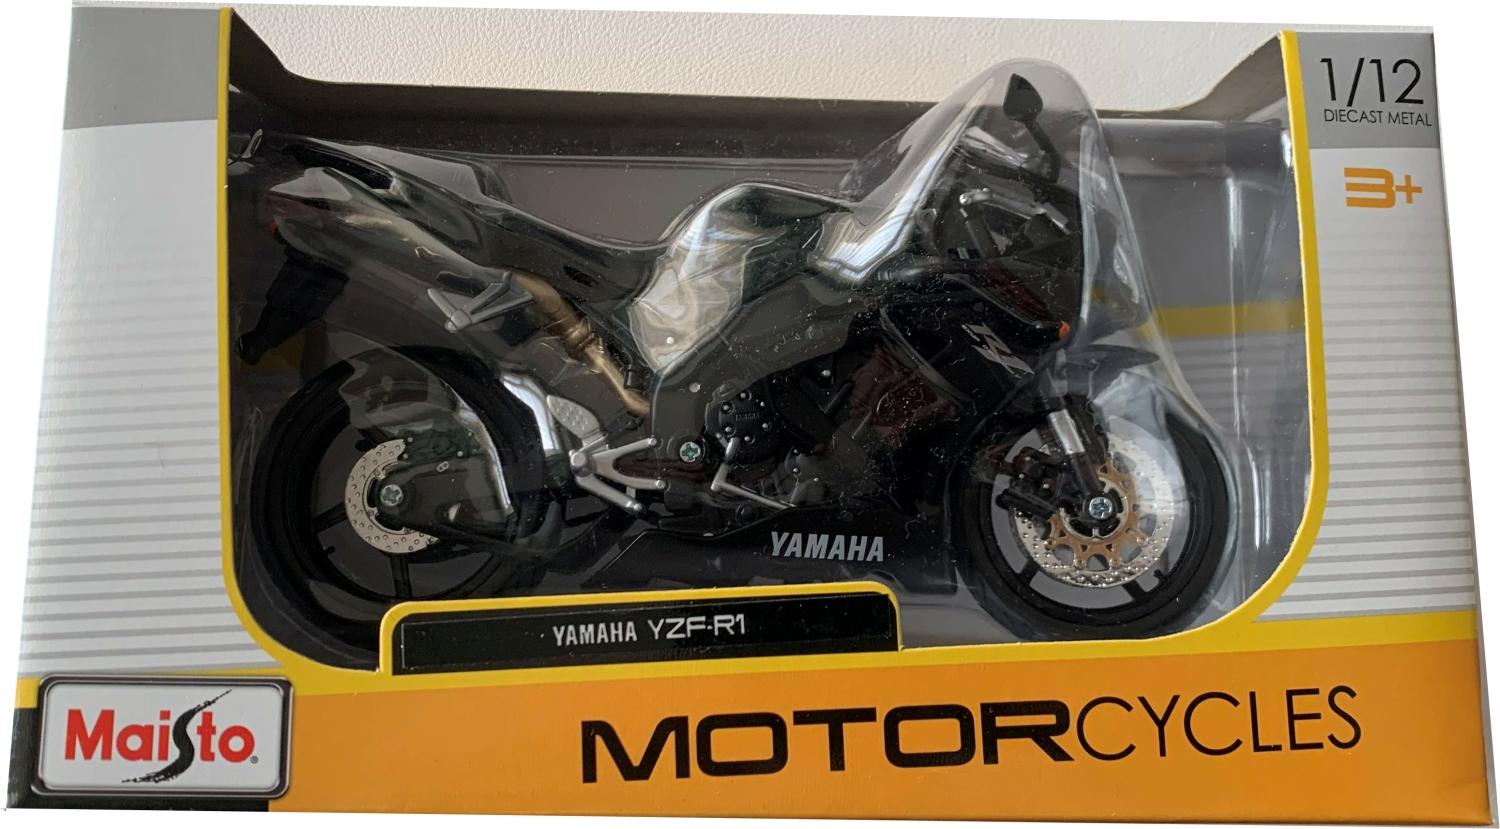 Yamaha YZF-R1 in black 1:12 scale model from Maisto